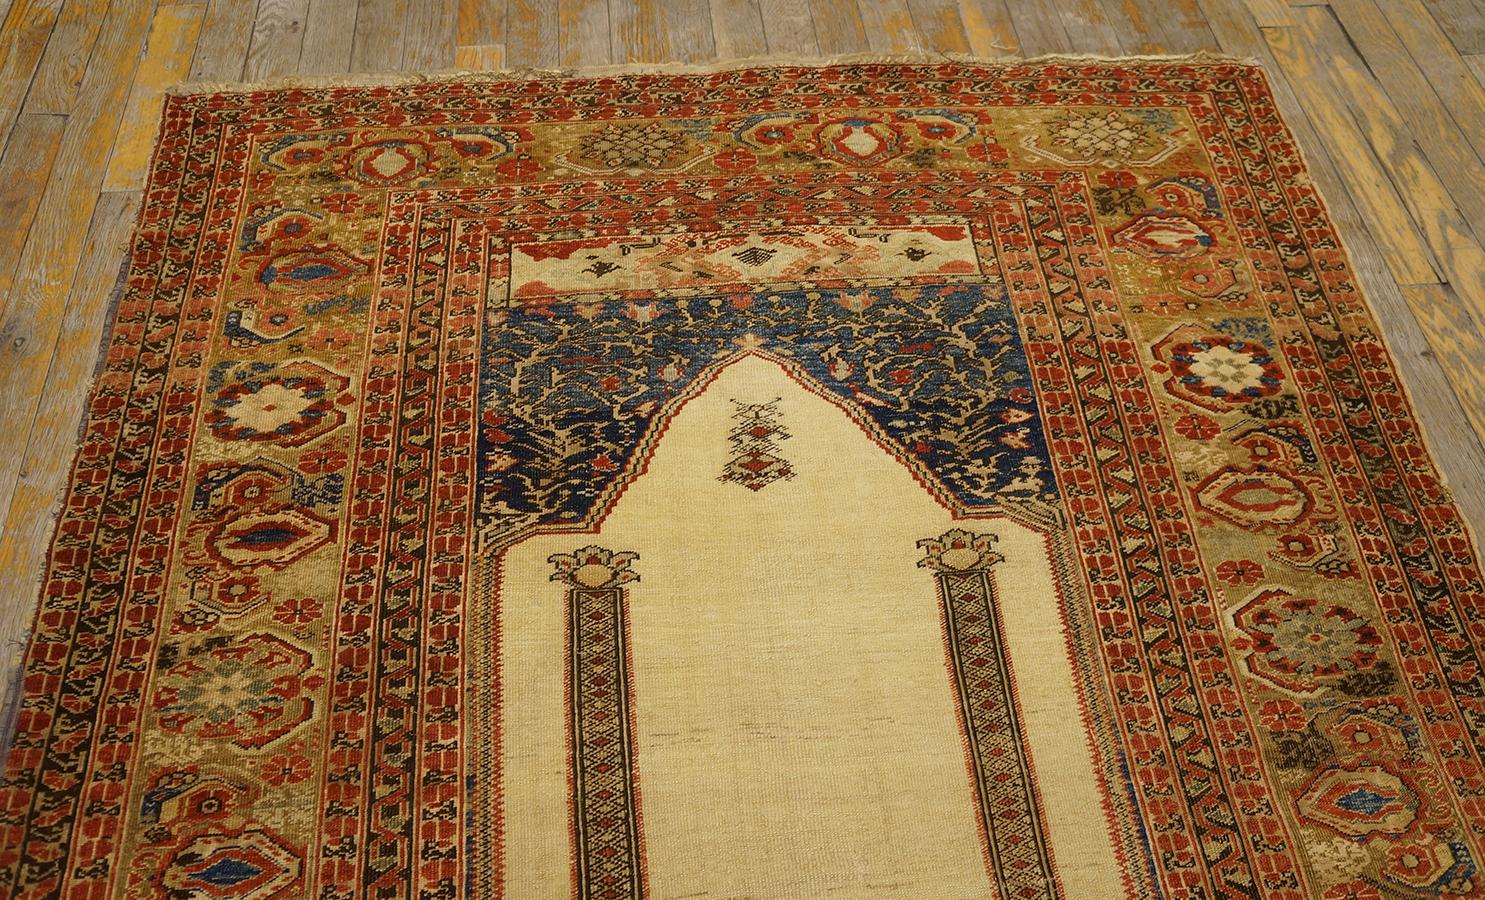 Hand-Knotted Mid 18th Century Turkish Ghiordes Prayer Carpet ( 3' 10' x 5' - 117 x 153 cm) For Sale